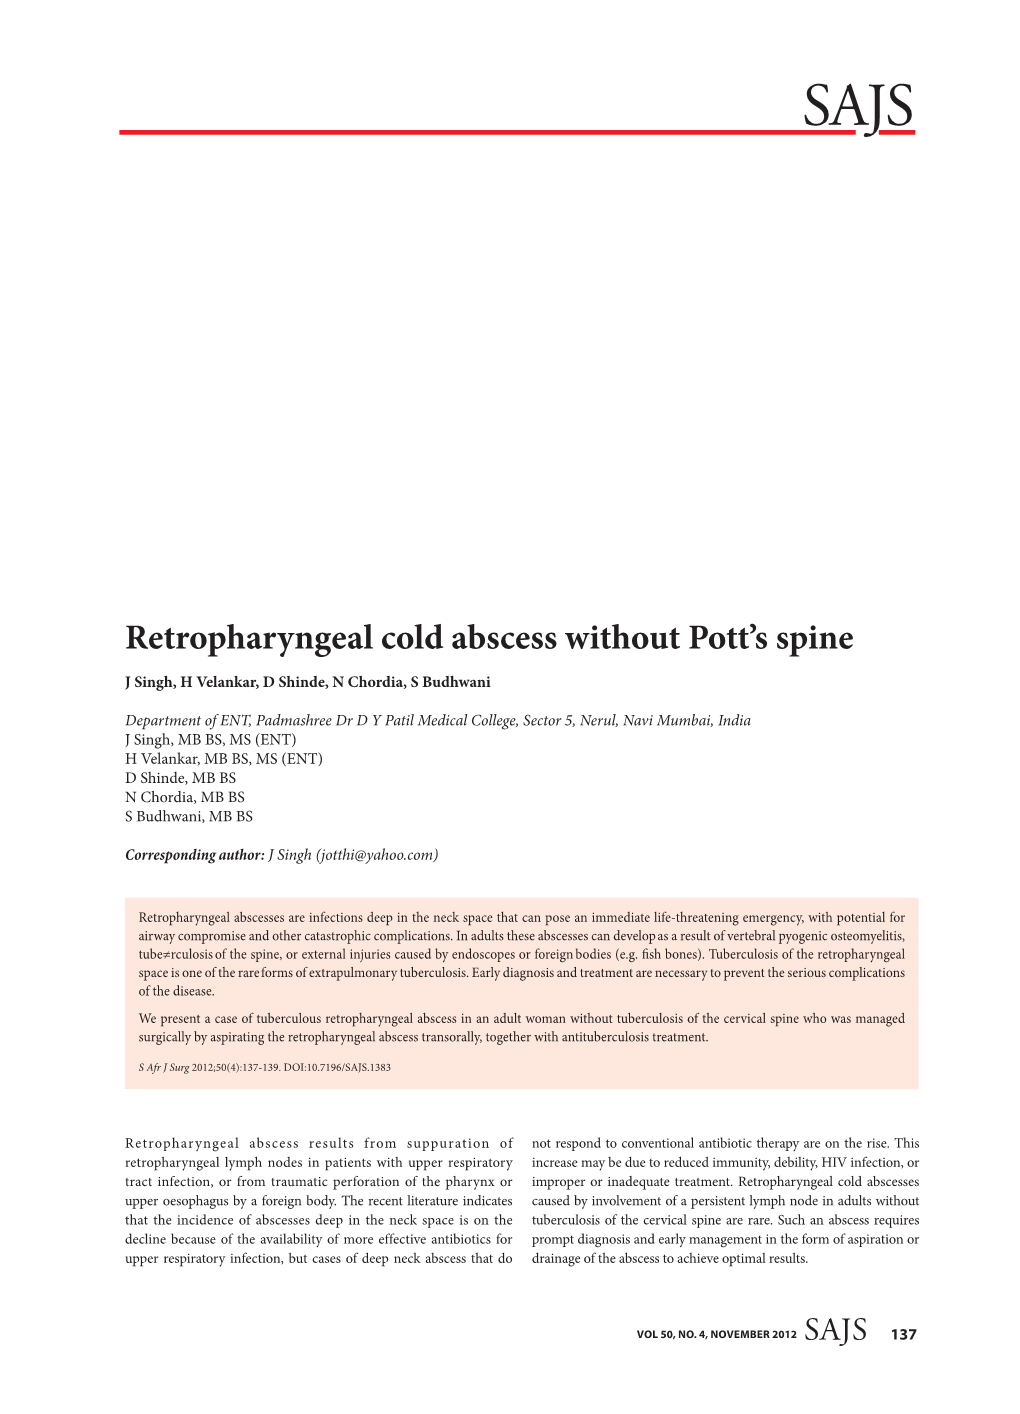 Retropharyngeal Cold Abscess Without Pott's Spine